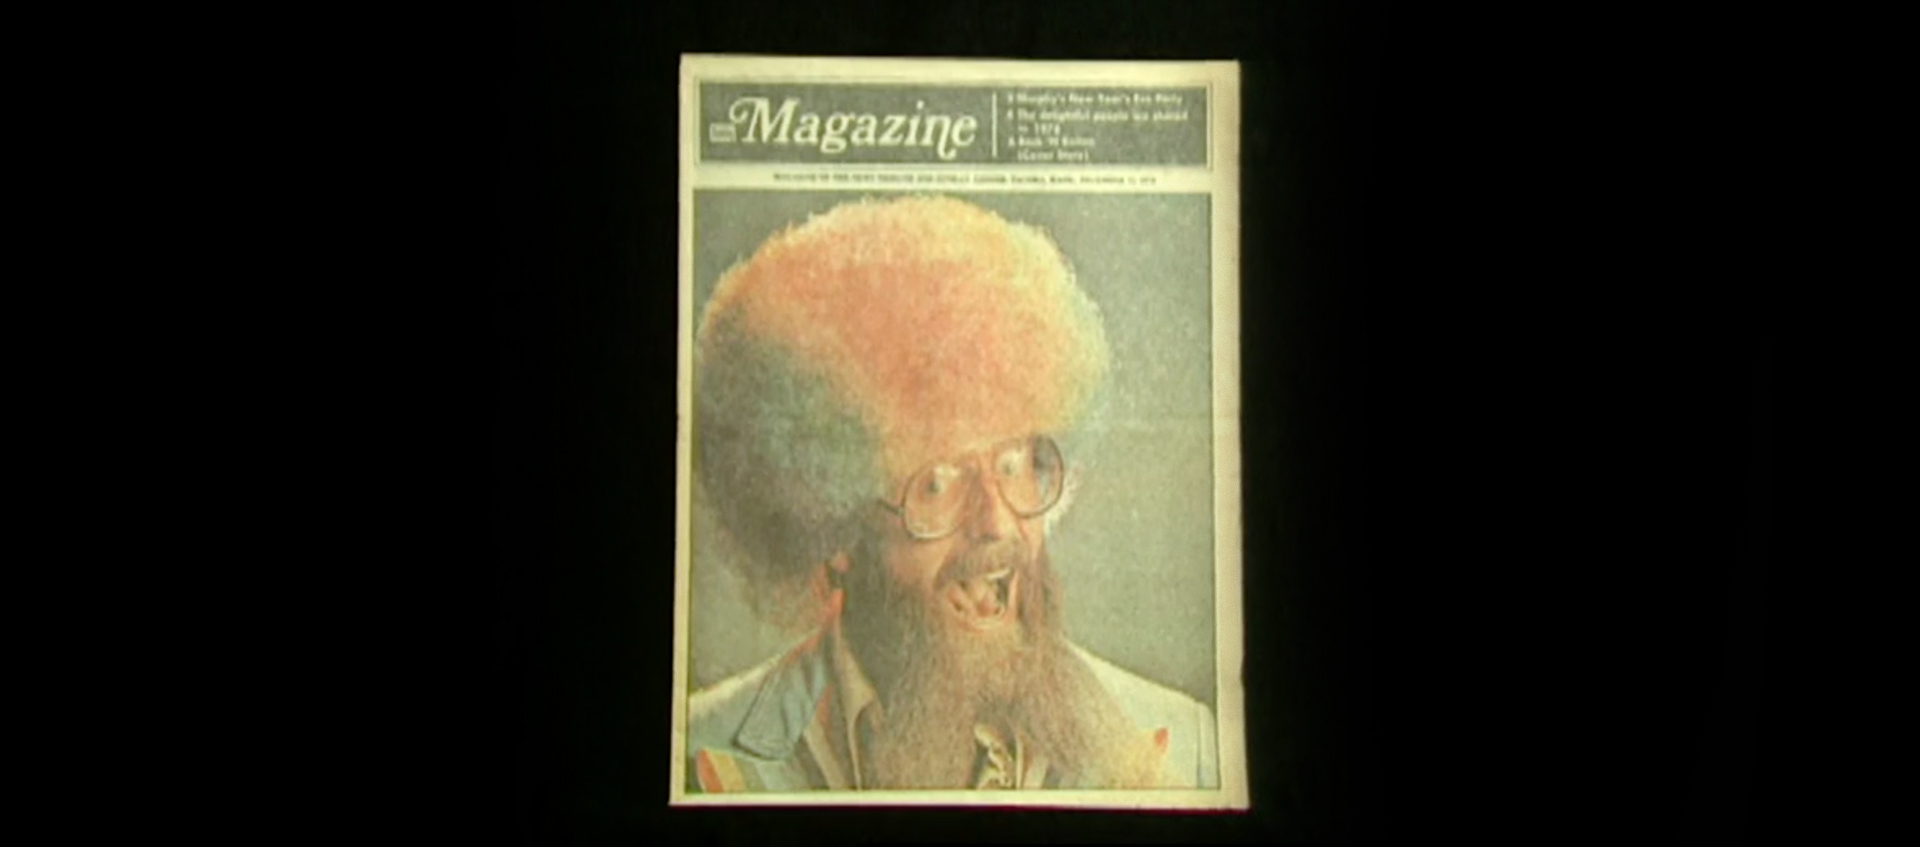 A magazine called "Magazine" depicts a smiling man, mouth open, in a brightly colored rainbow wig. He wears eyeglasses and has a beard that goes down to his chest.